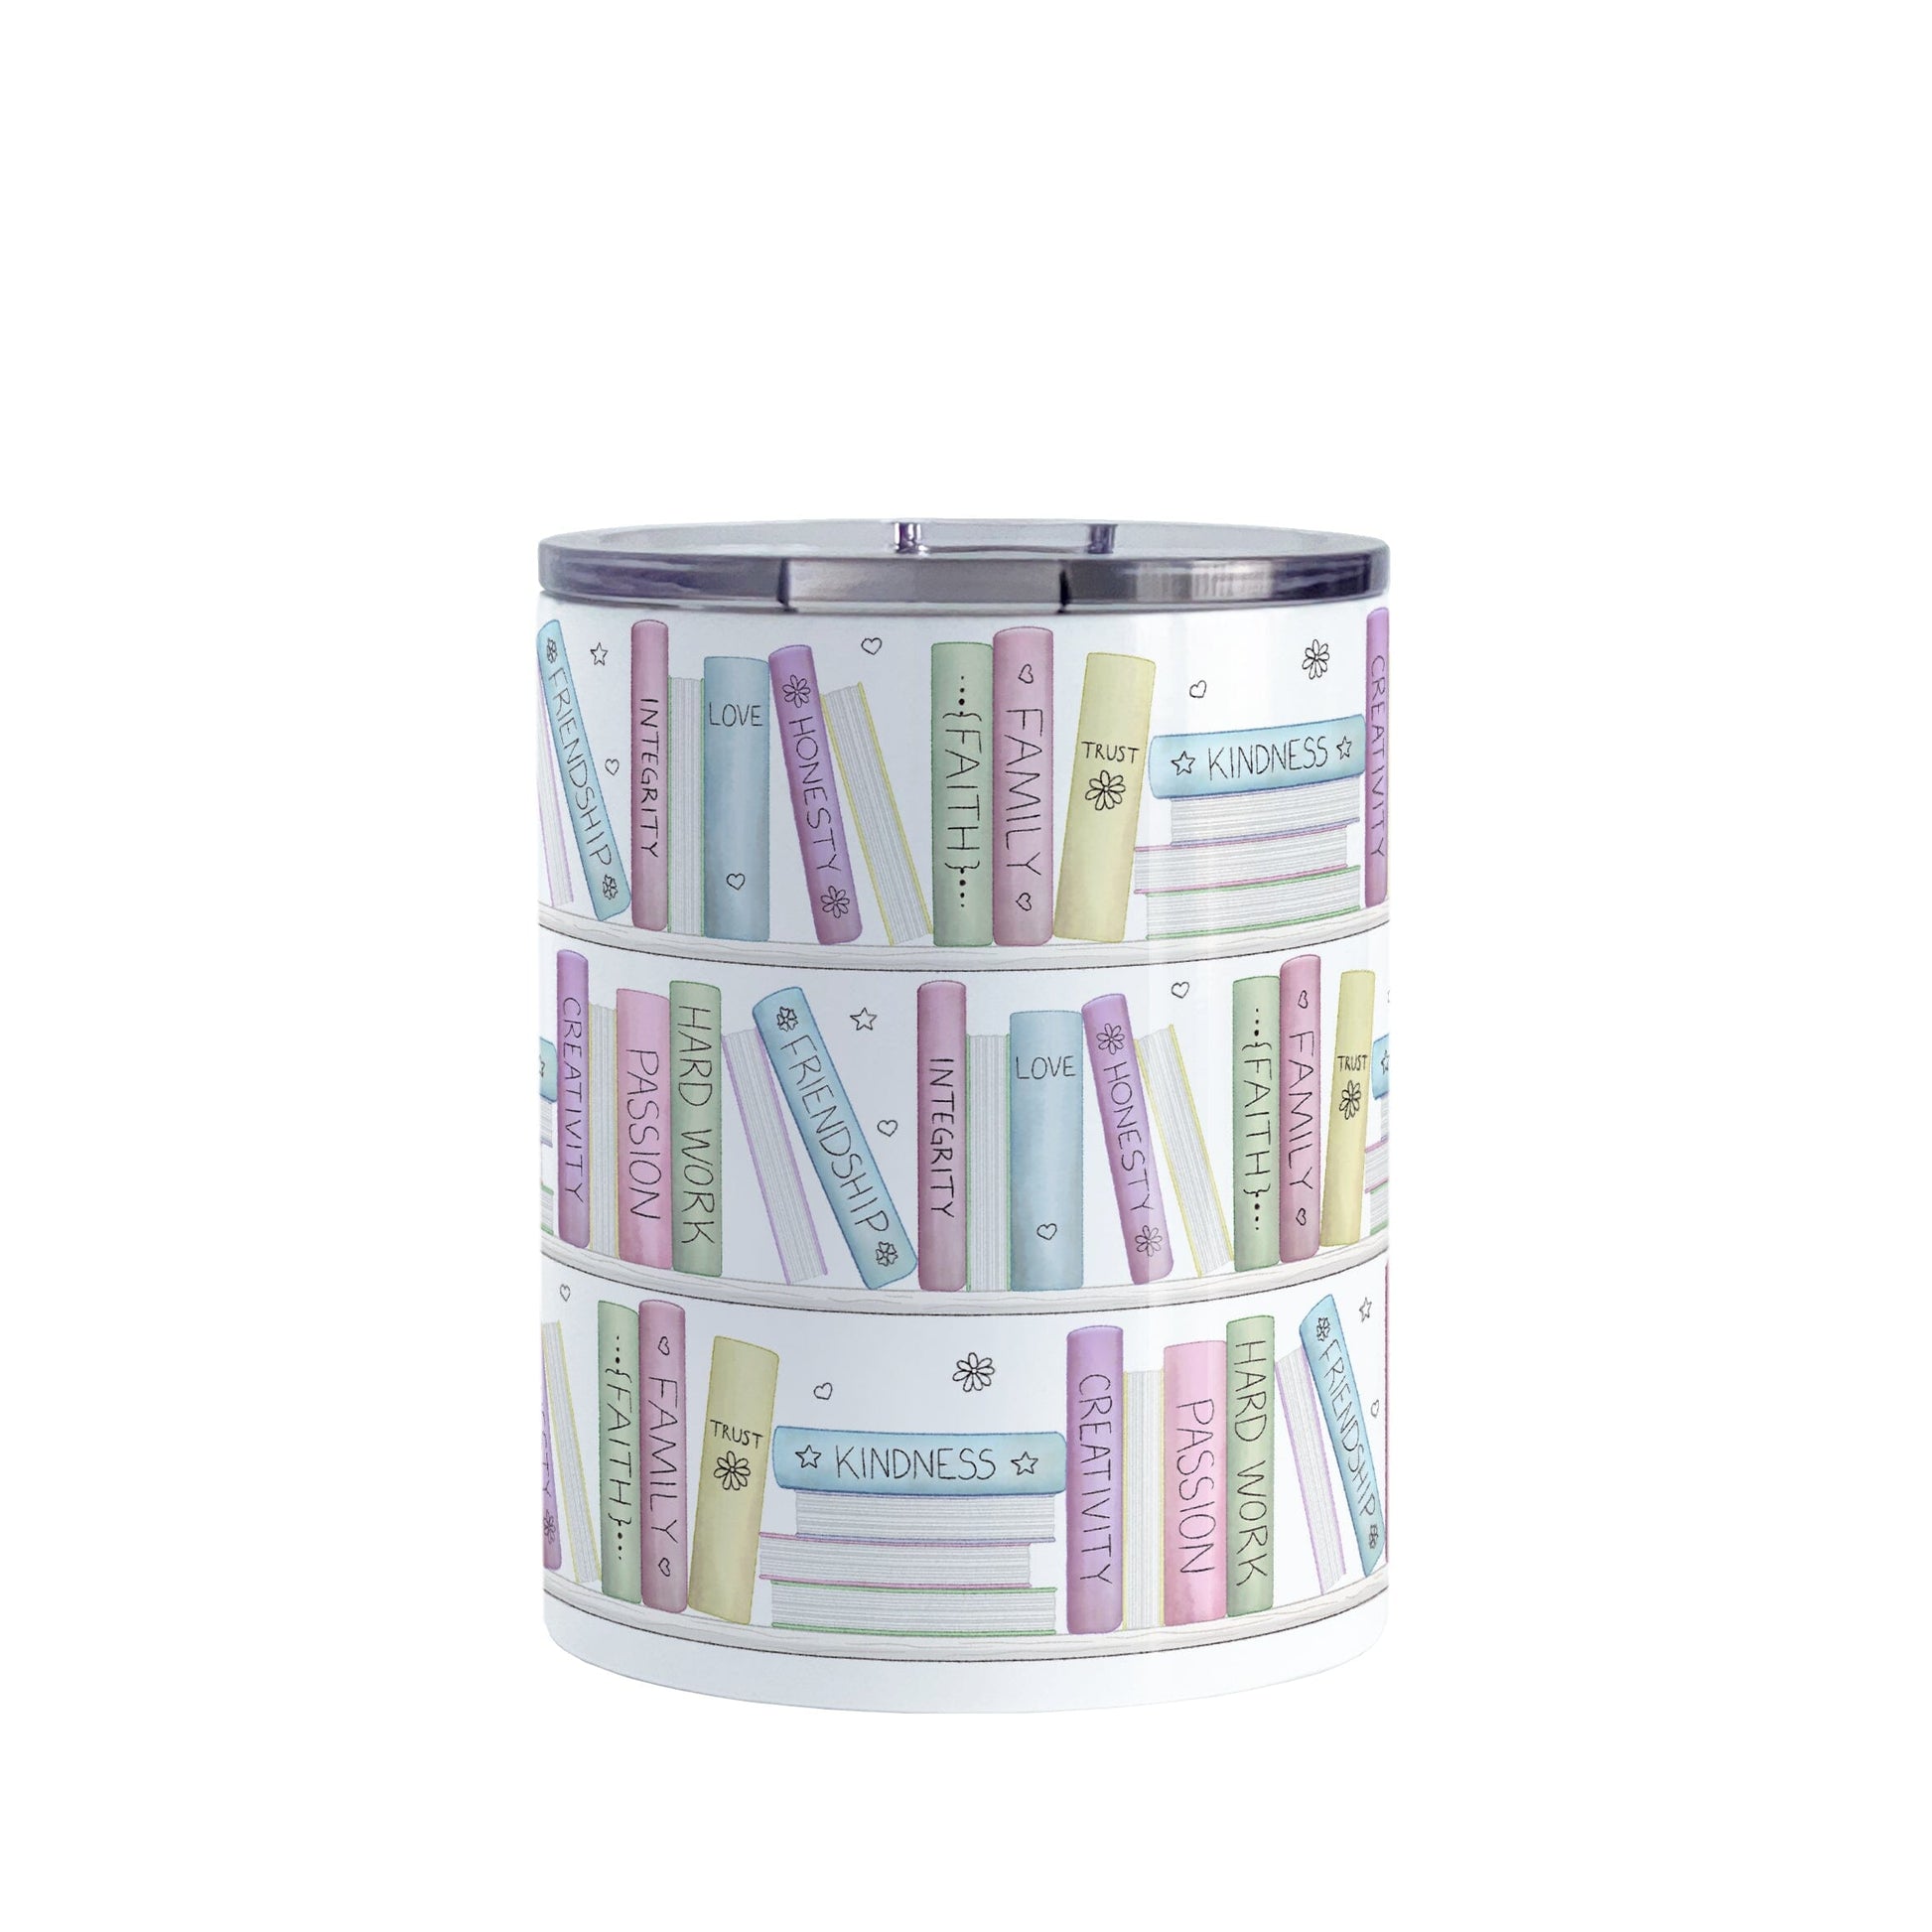 The Building Books of Life - Inspirational Reading Tumbler Cup (10oz) at Amy's Coffee Mugs. A stainless steel tumbler cup designed with a colorful pattern of books on a bookshelf each with an inspirational title that all could be considered important building blocks of life, such as love, family, integrity, passion, faith, creativity, and more. 